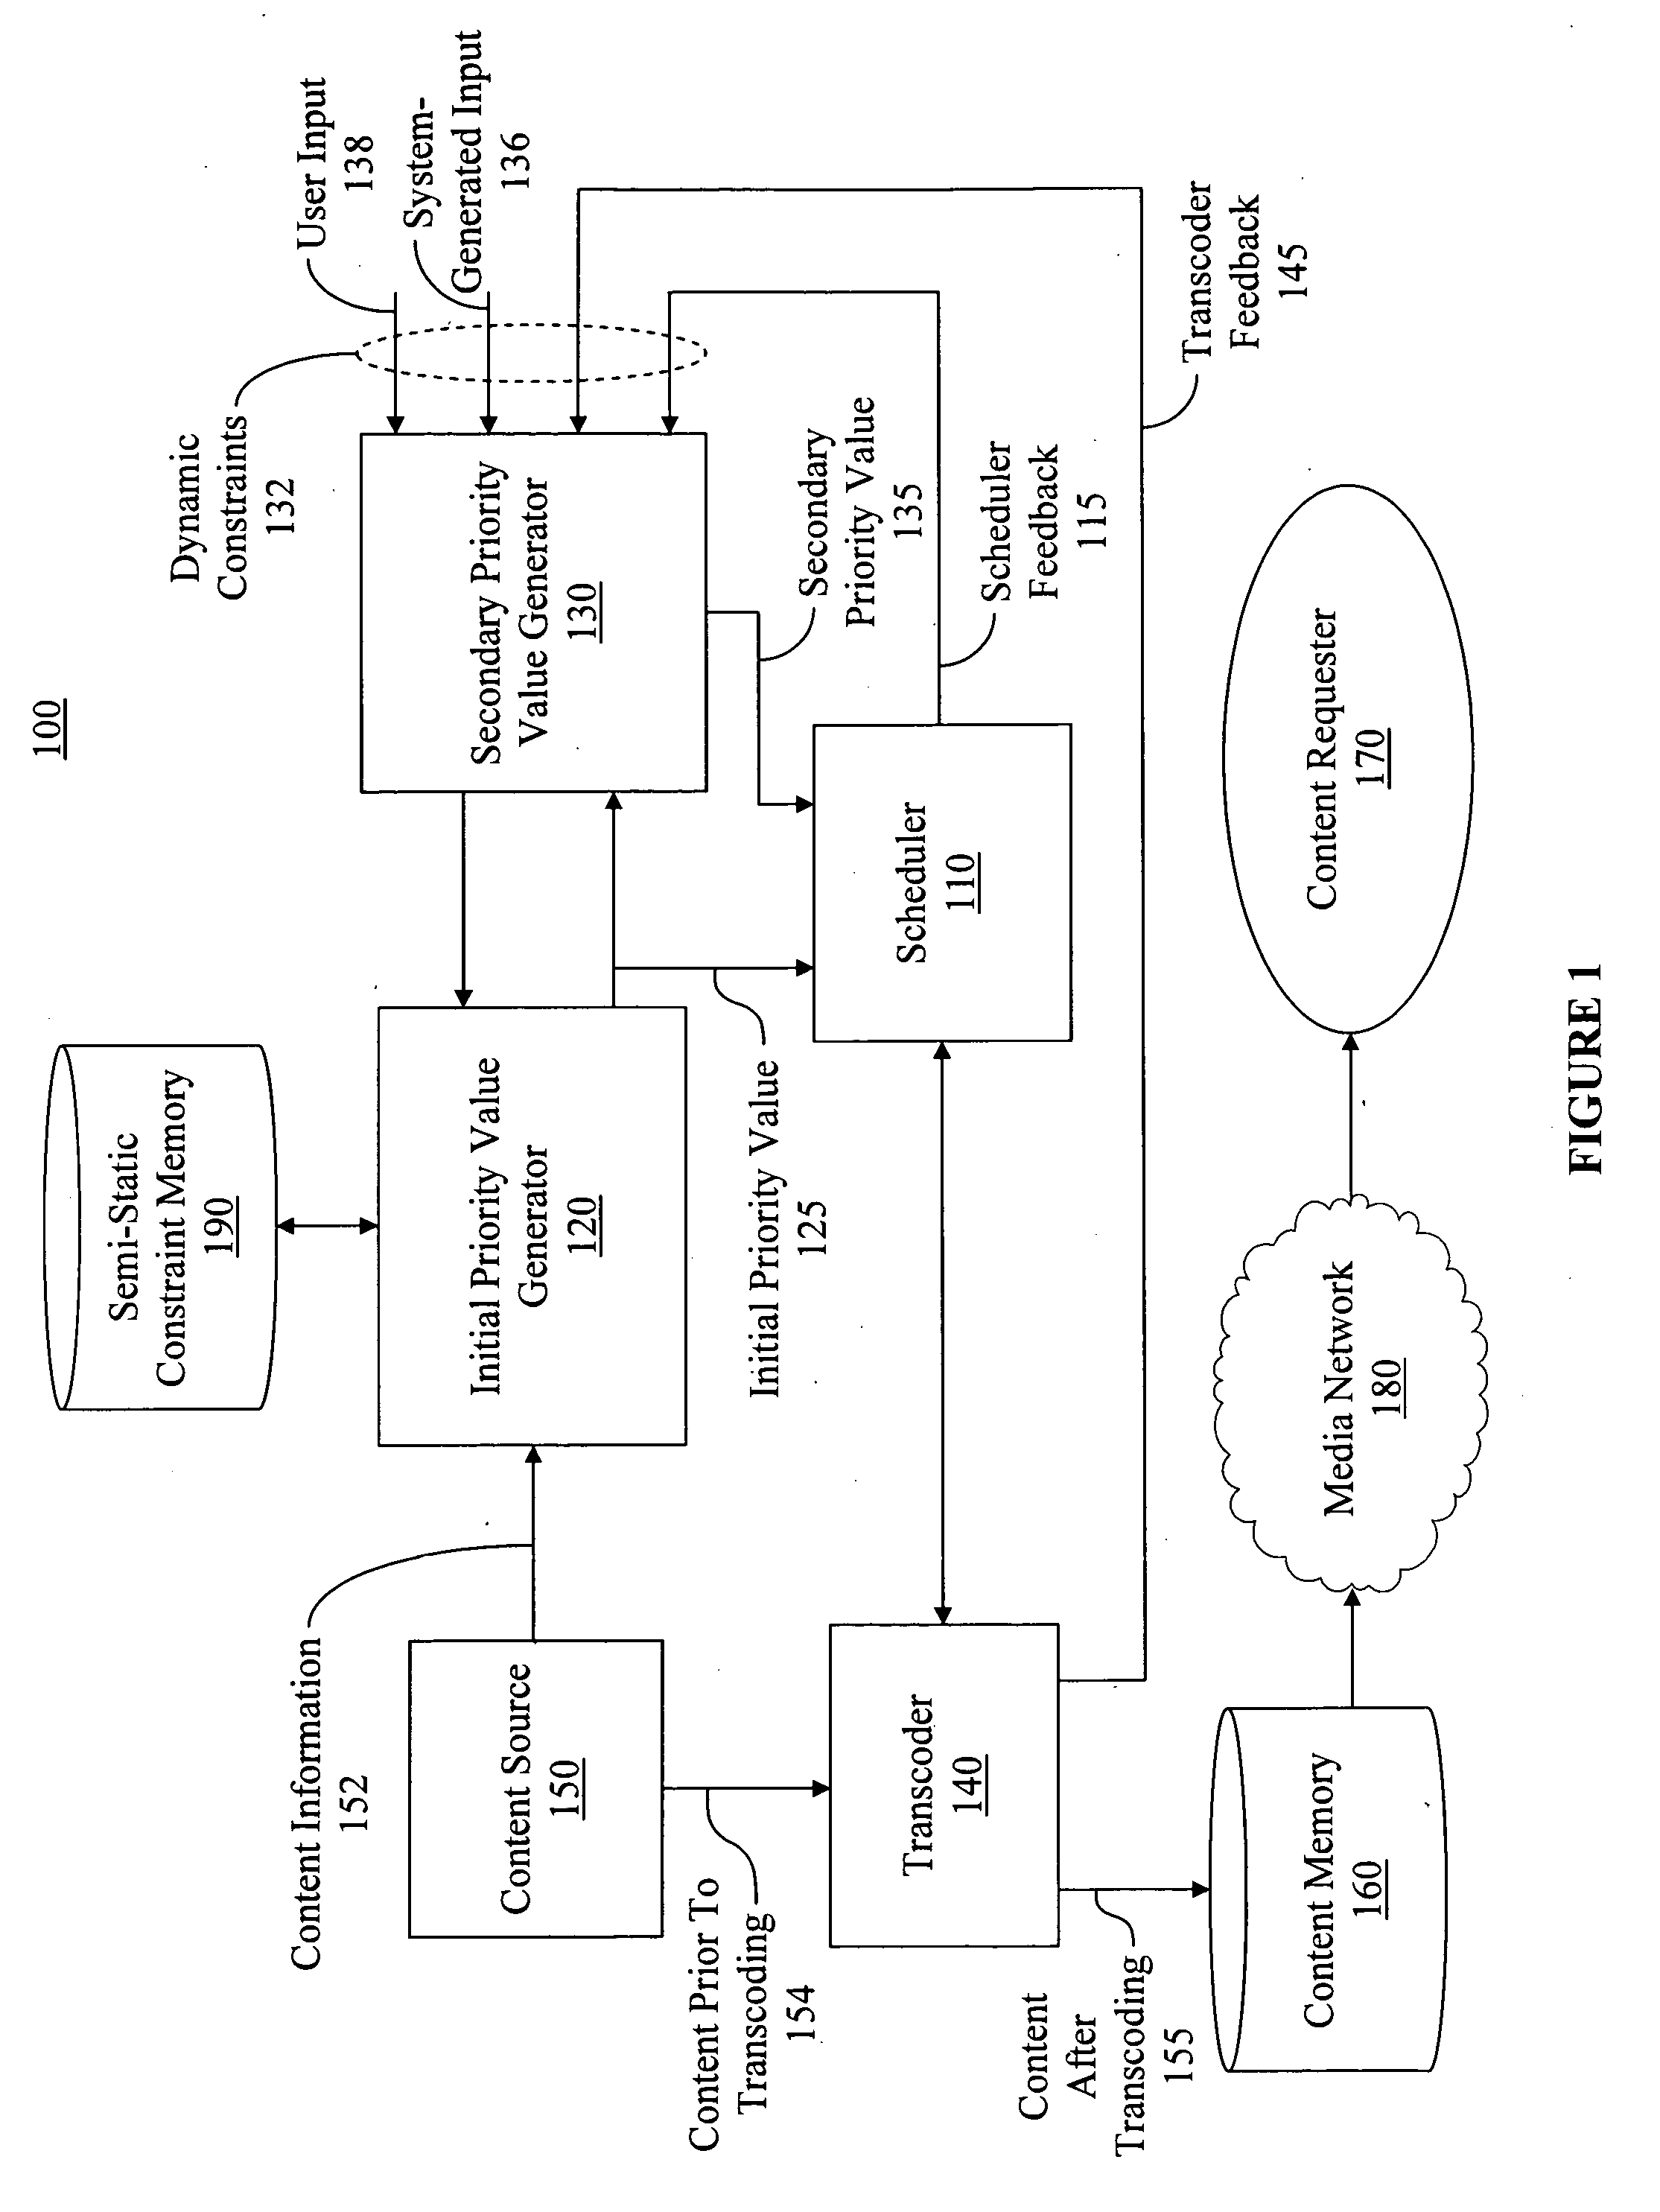 System and method for improved scheduling of content transcoding